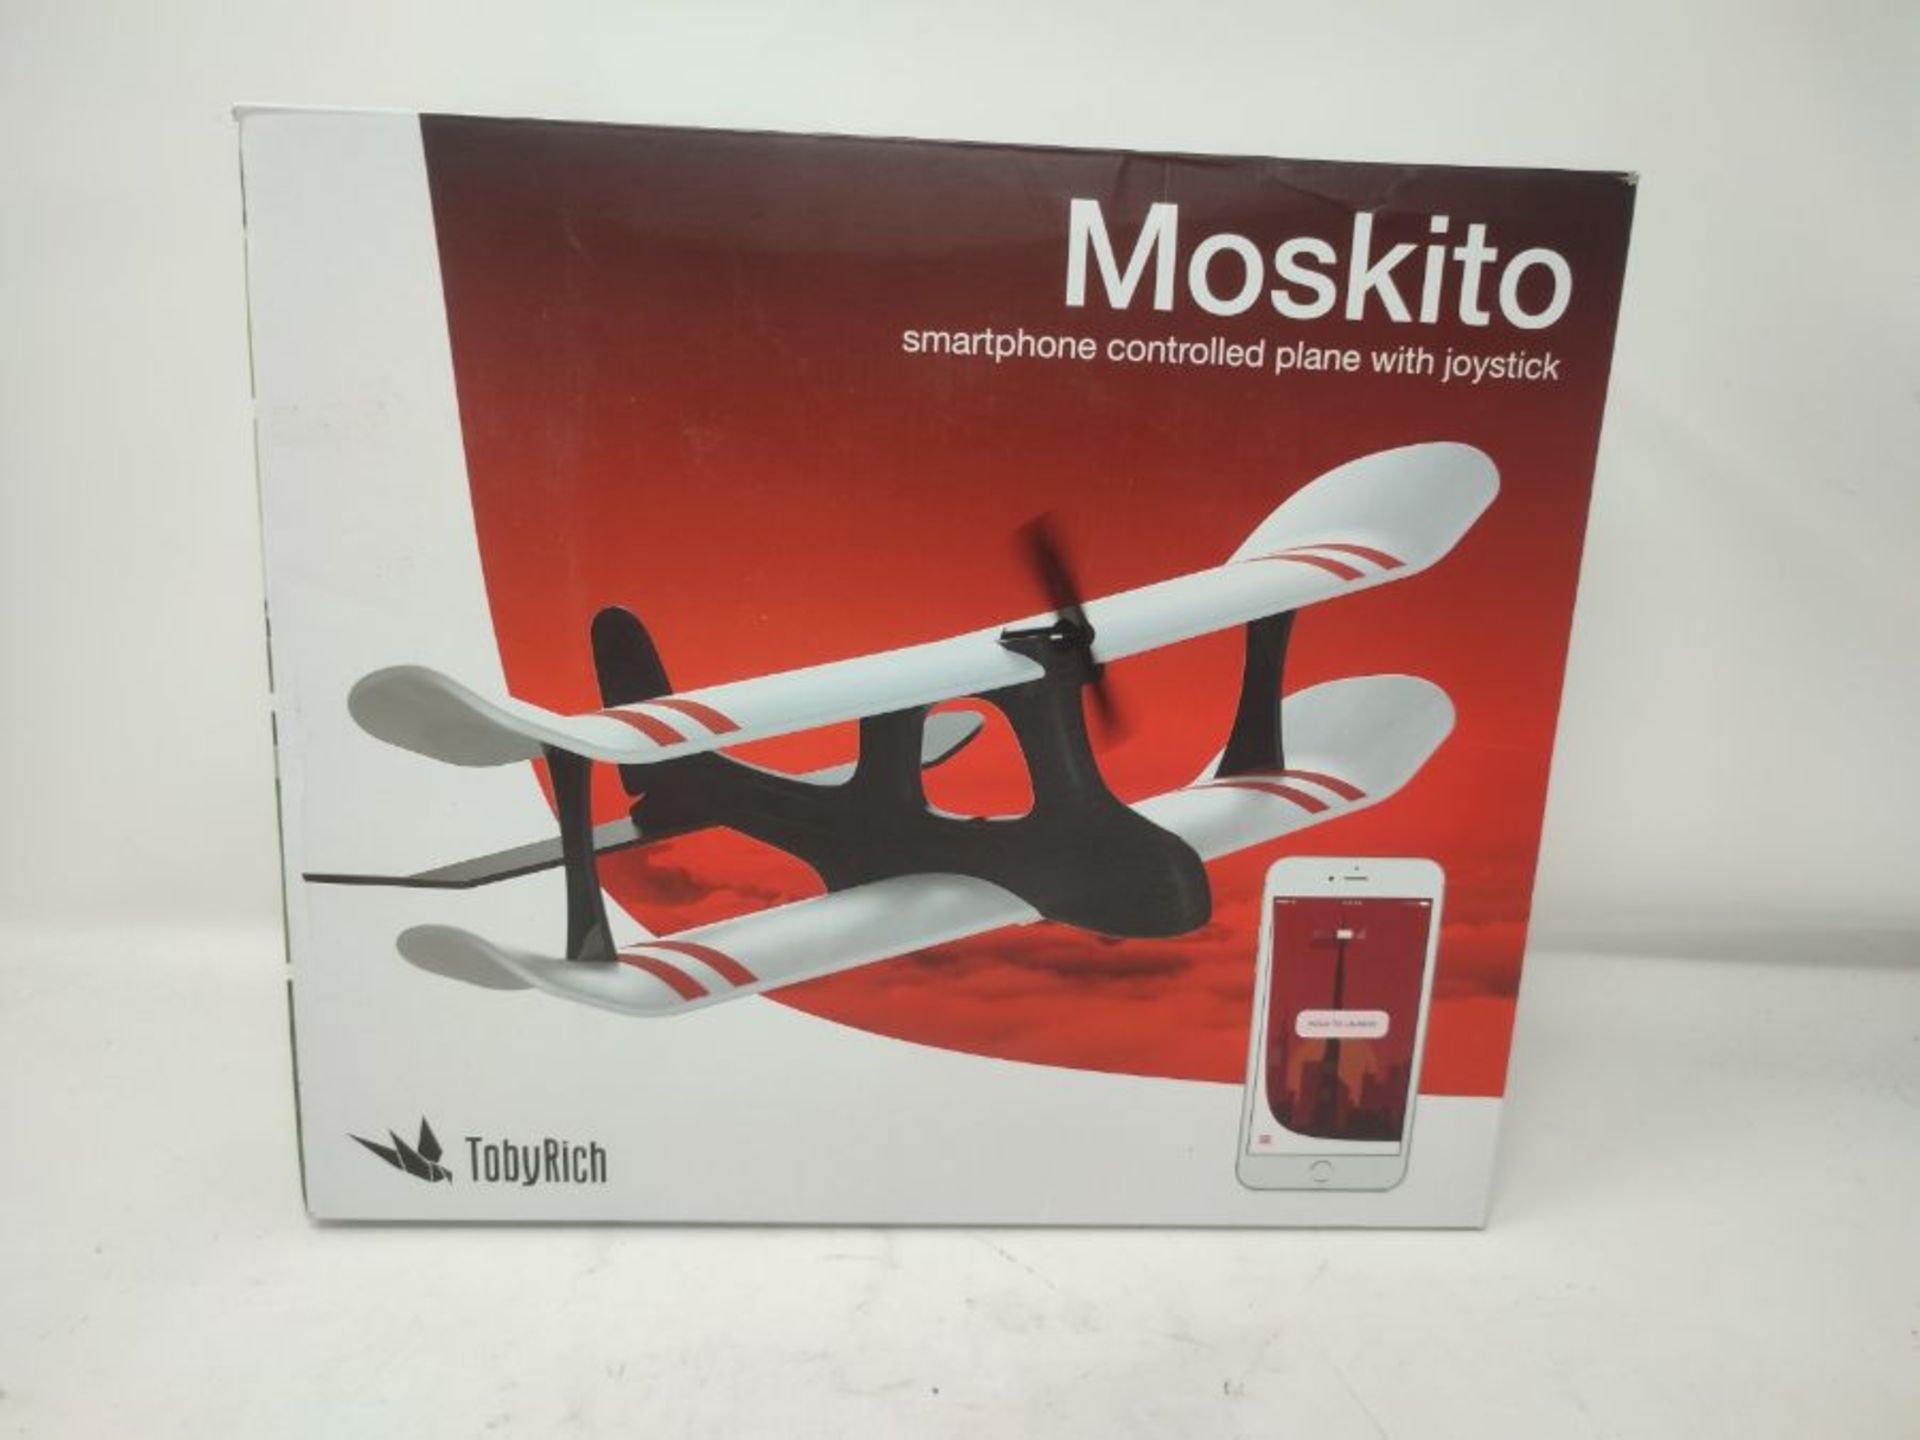 TobyRich SPBL02-016 Moskito Smartphone App Controlled Aero plane - Remote Controlled D - Image 2 of 3